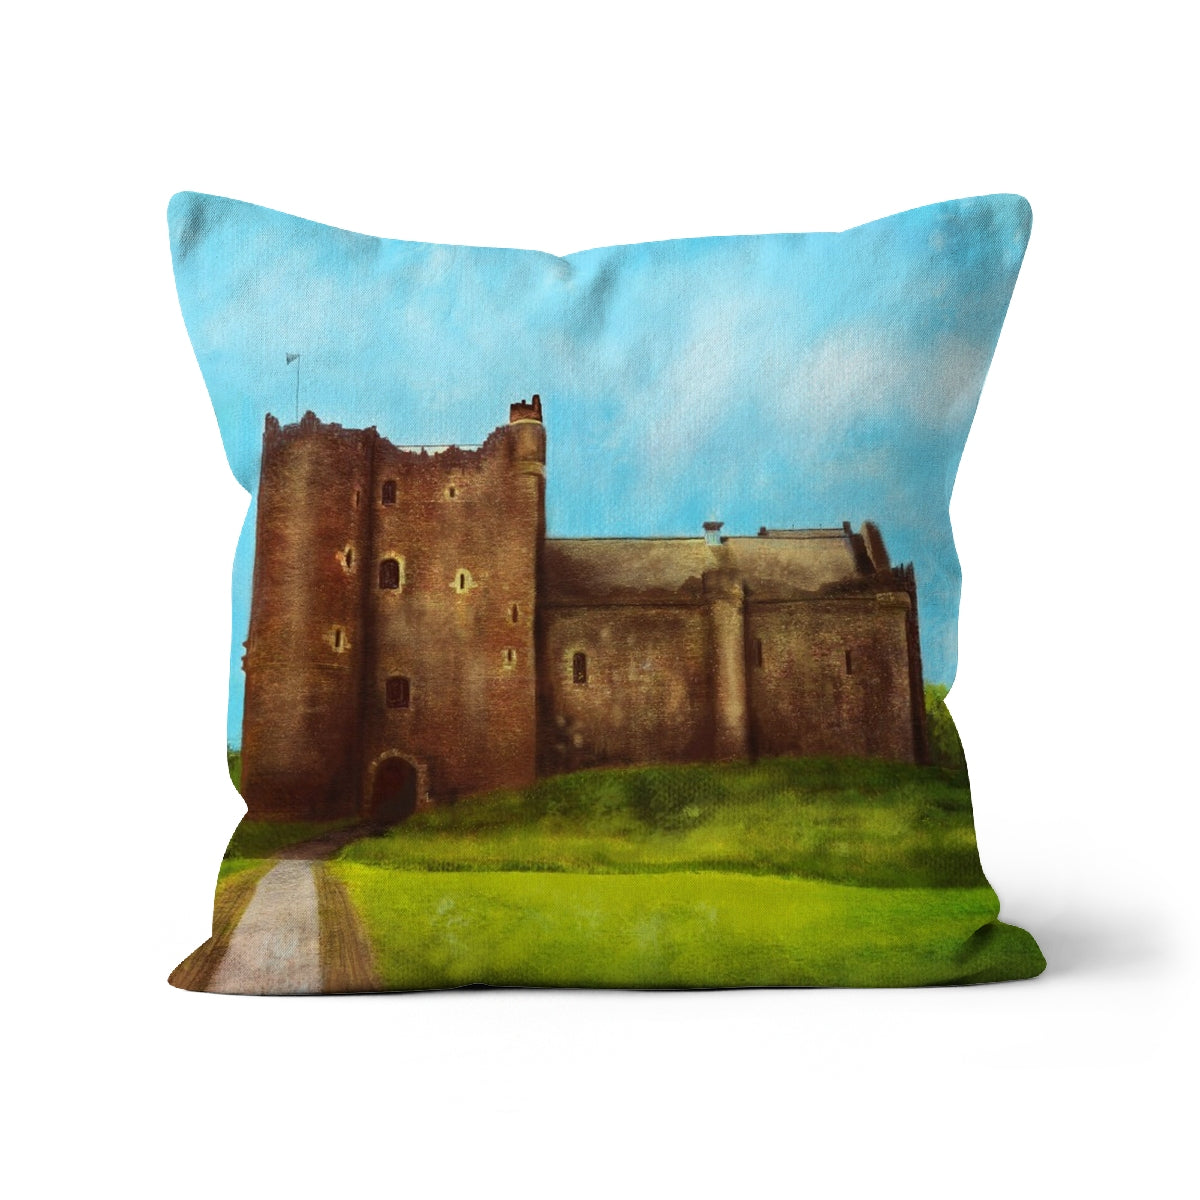 Doune Castle Art Gifts Cushion-Cushions-Historic & Iconic Scotland Art Gallery-Linen-24"x24"-Paintings, Prints, Homeware, Art Gifts From Scotland By Scottish Artist Kevin Hunter